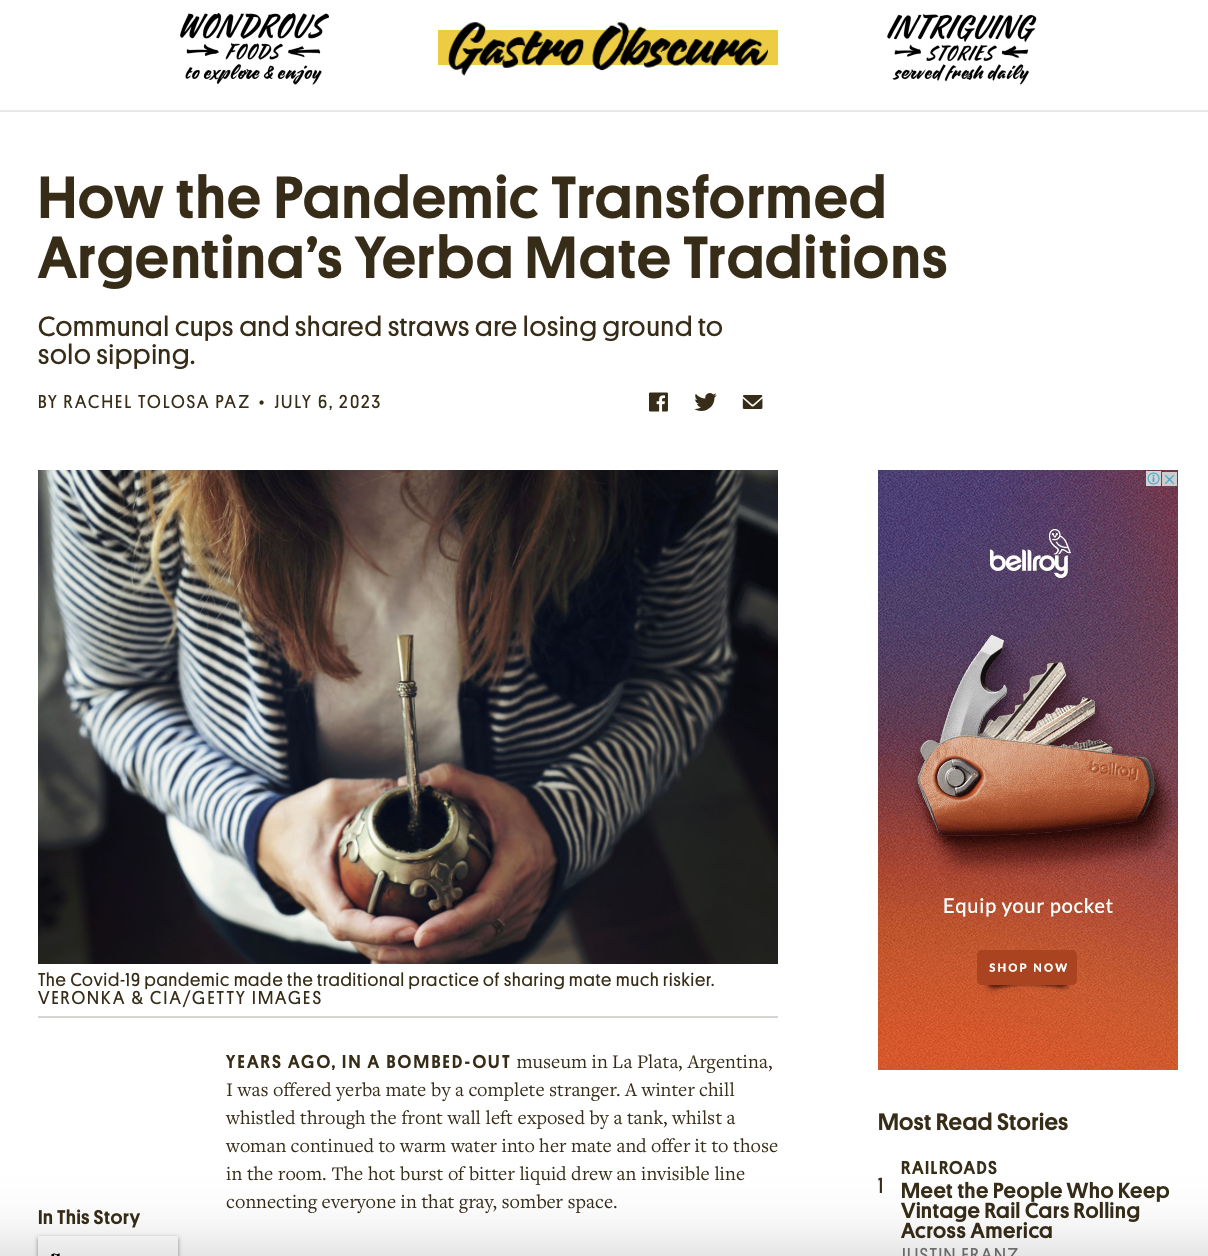 How the Pandemic Transformed Argentina’s Yerba Mate Traditions